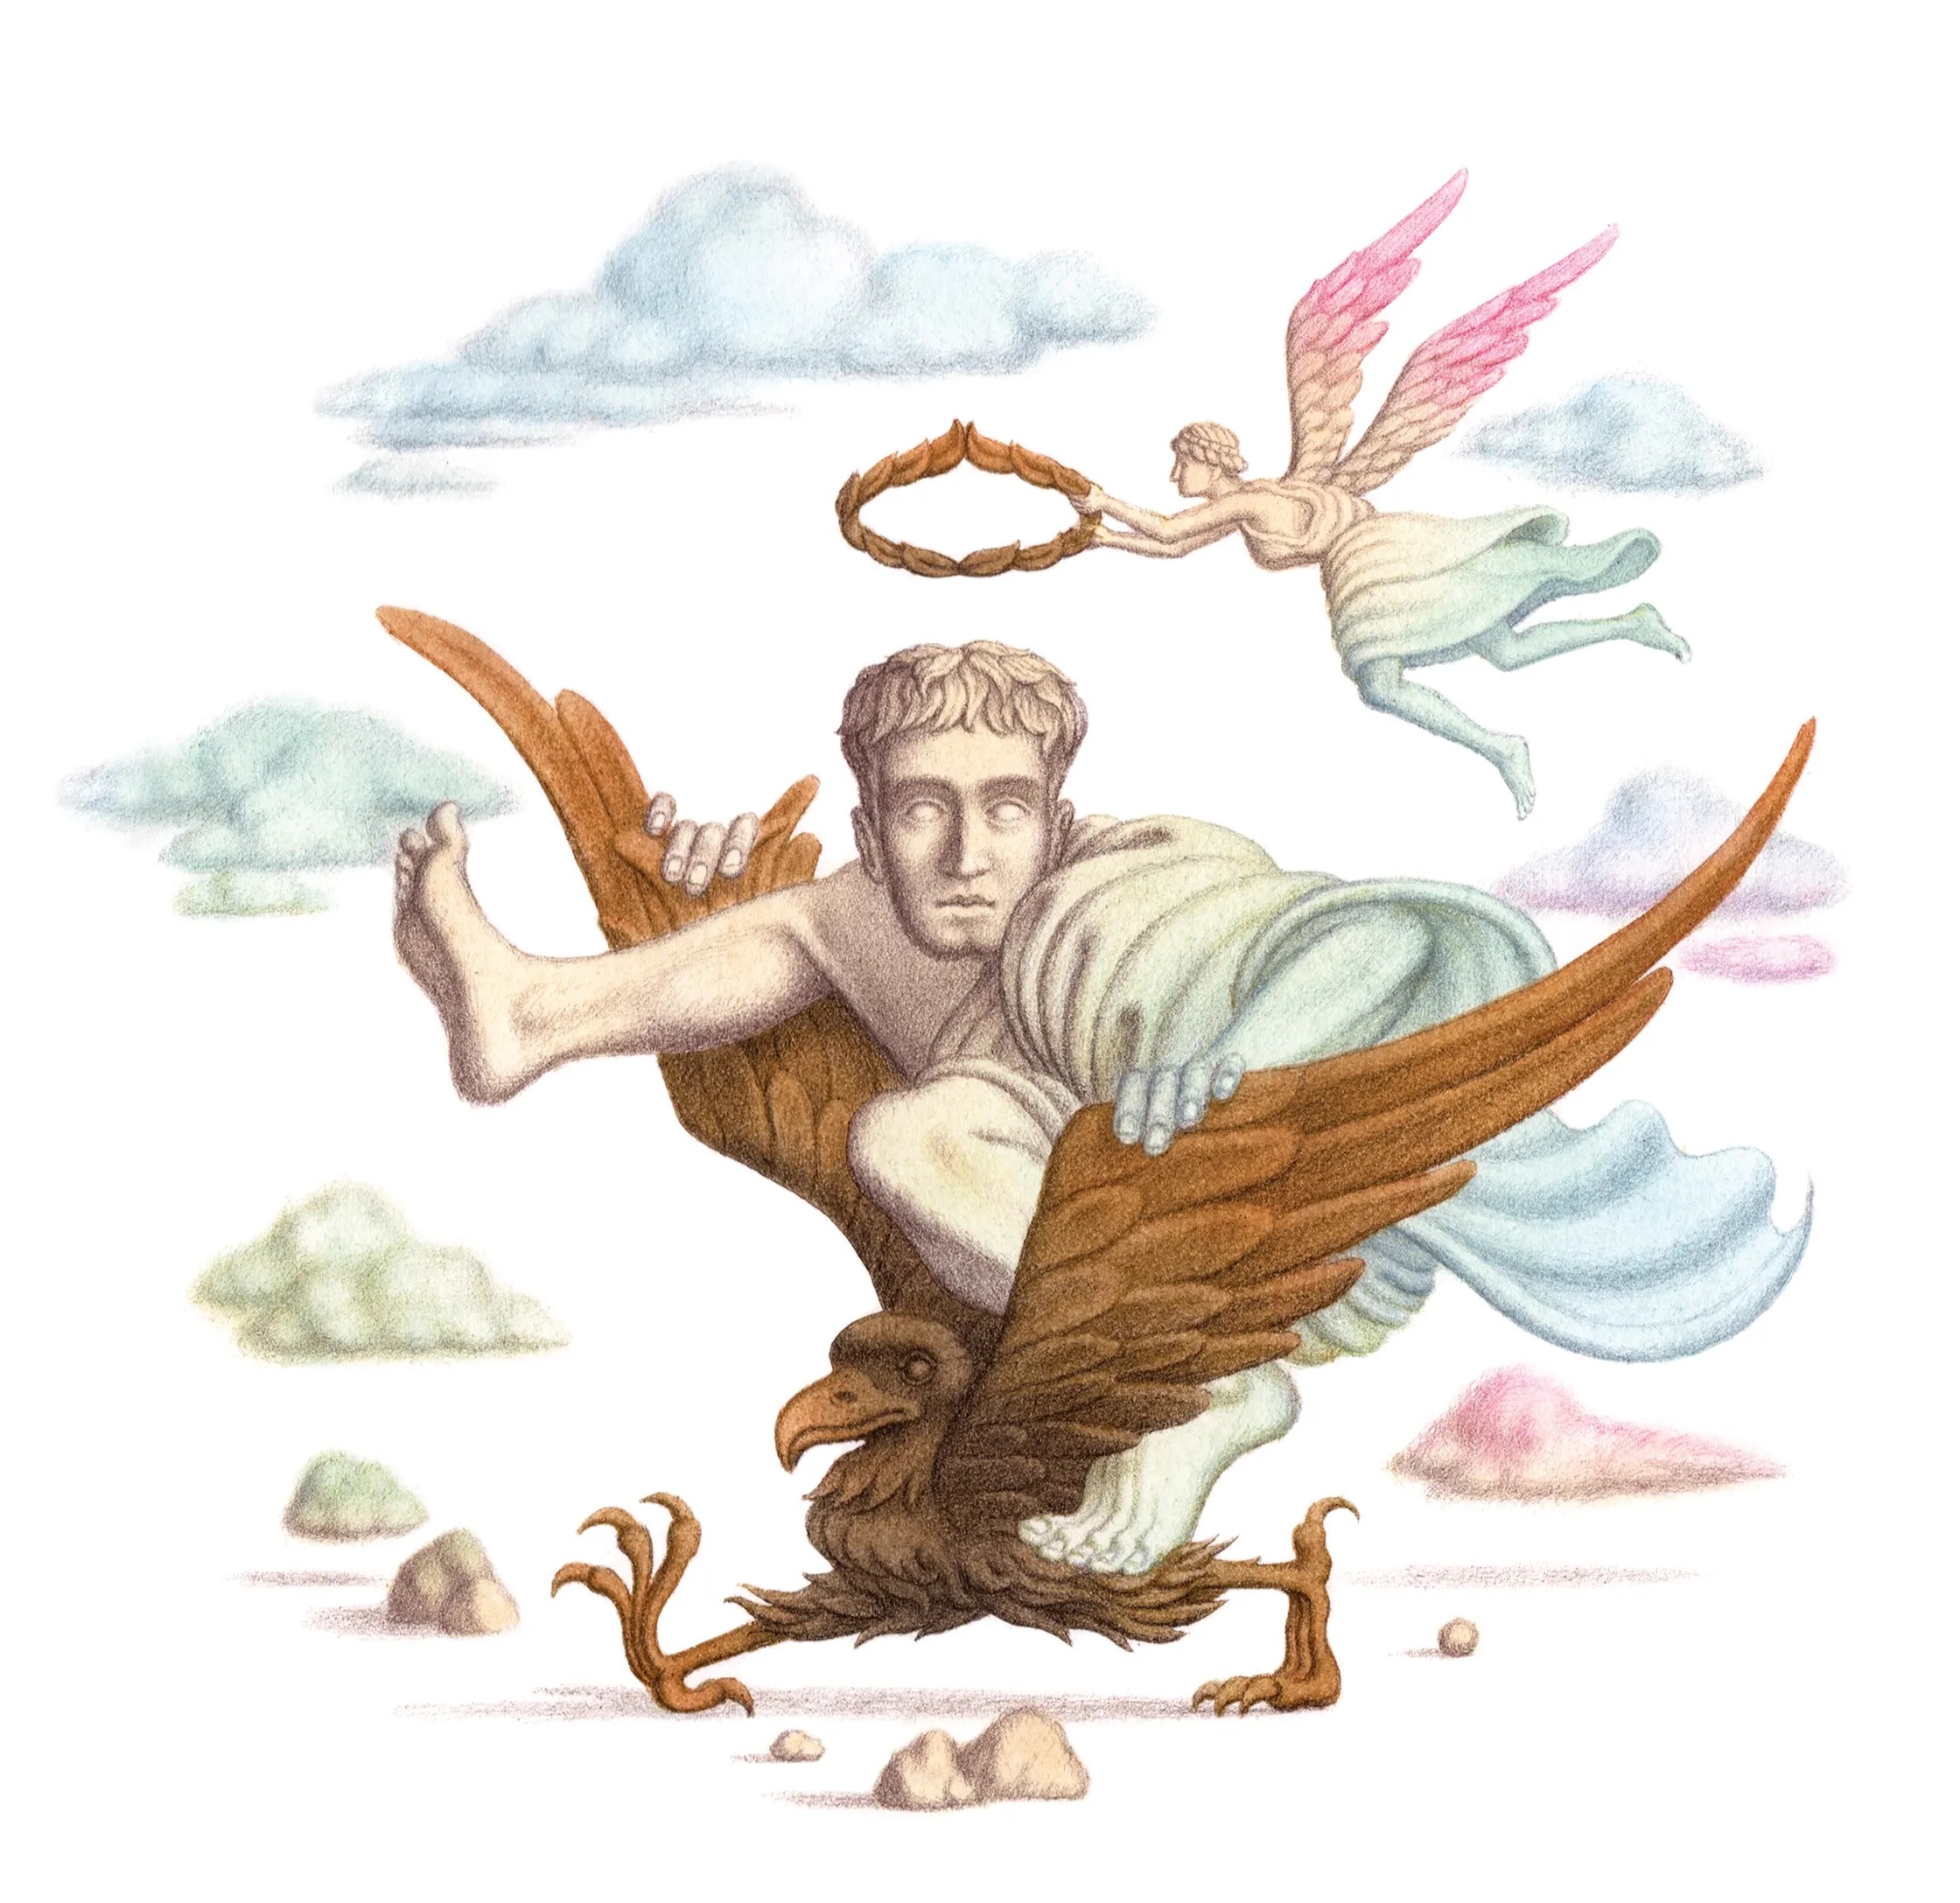 an-eagle-which-was-often-included-in-the-imperial-funeral-pyre-was-thought-to-take-the-emperors-soul-to-the-gods-on-mt-olympus-llustration-by-daniele-castellano